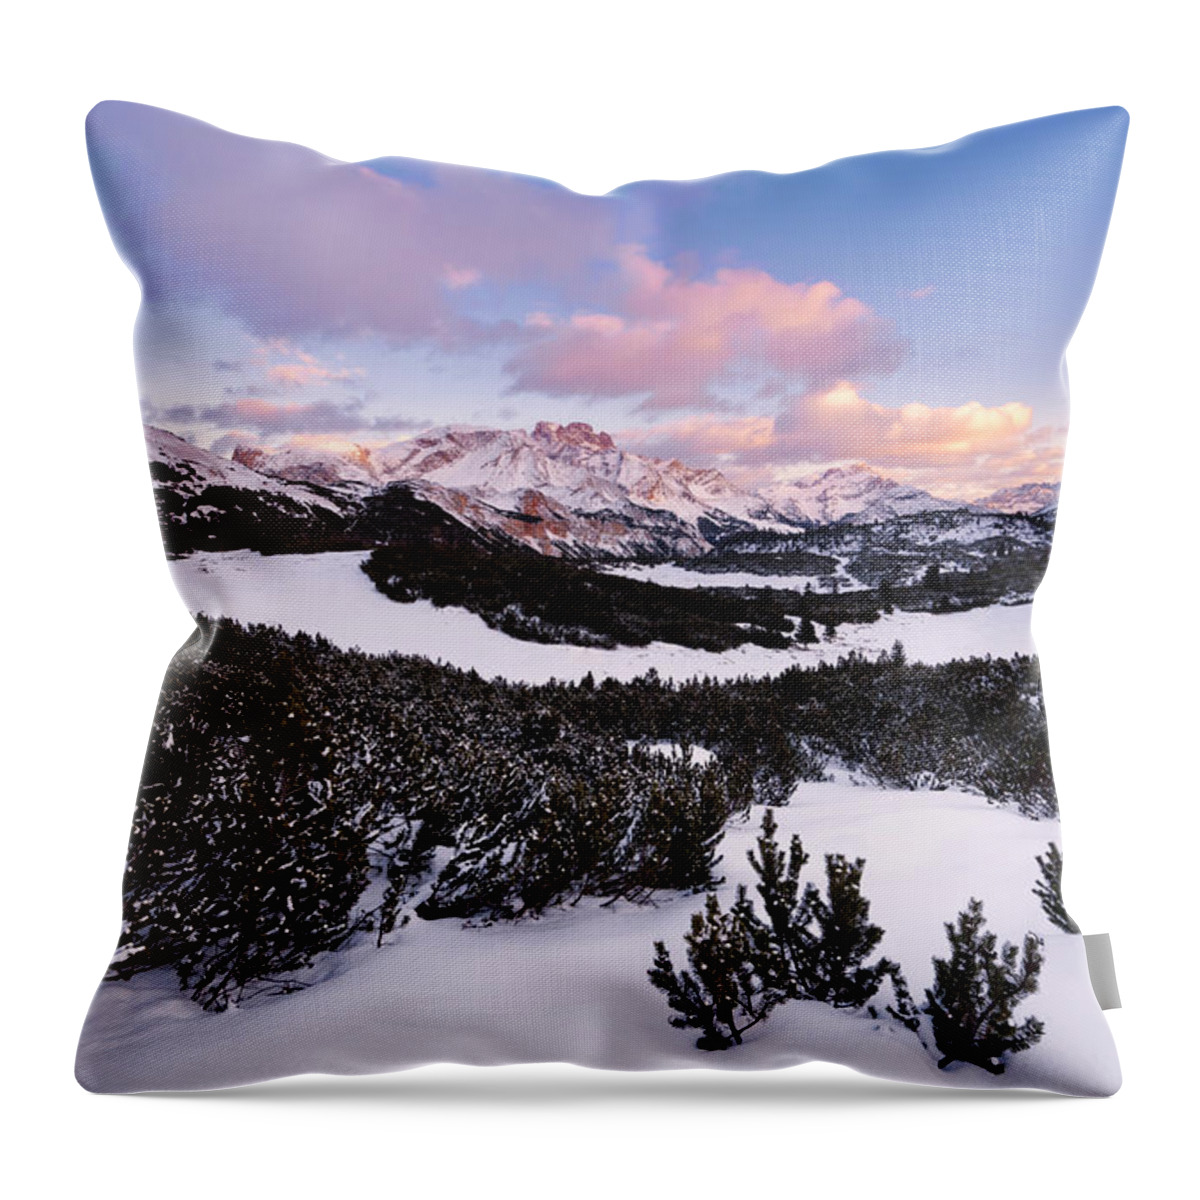 Scenics Throw Pillow featuring the photograph Peace And Quiet In The Mountains by Scacciamosche